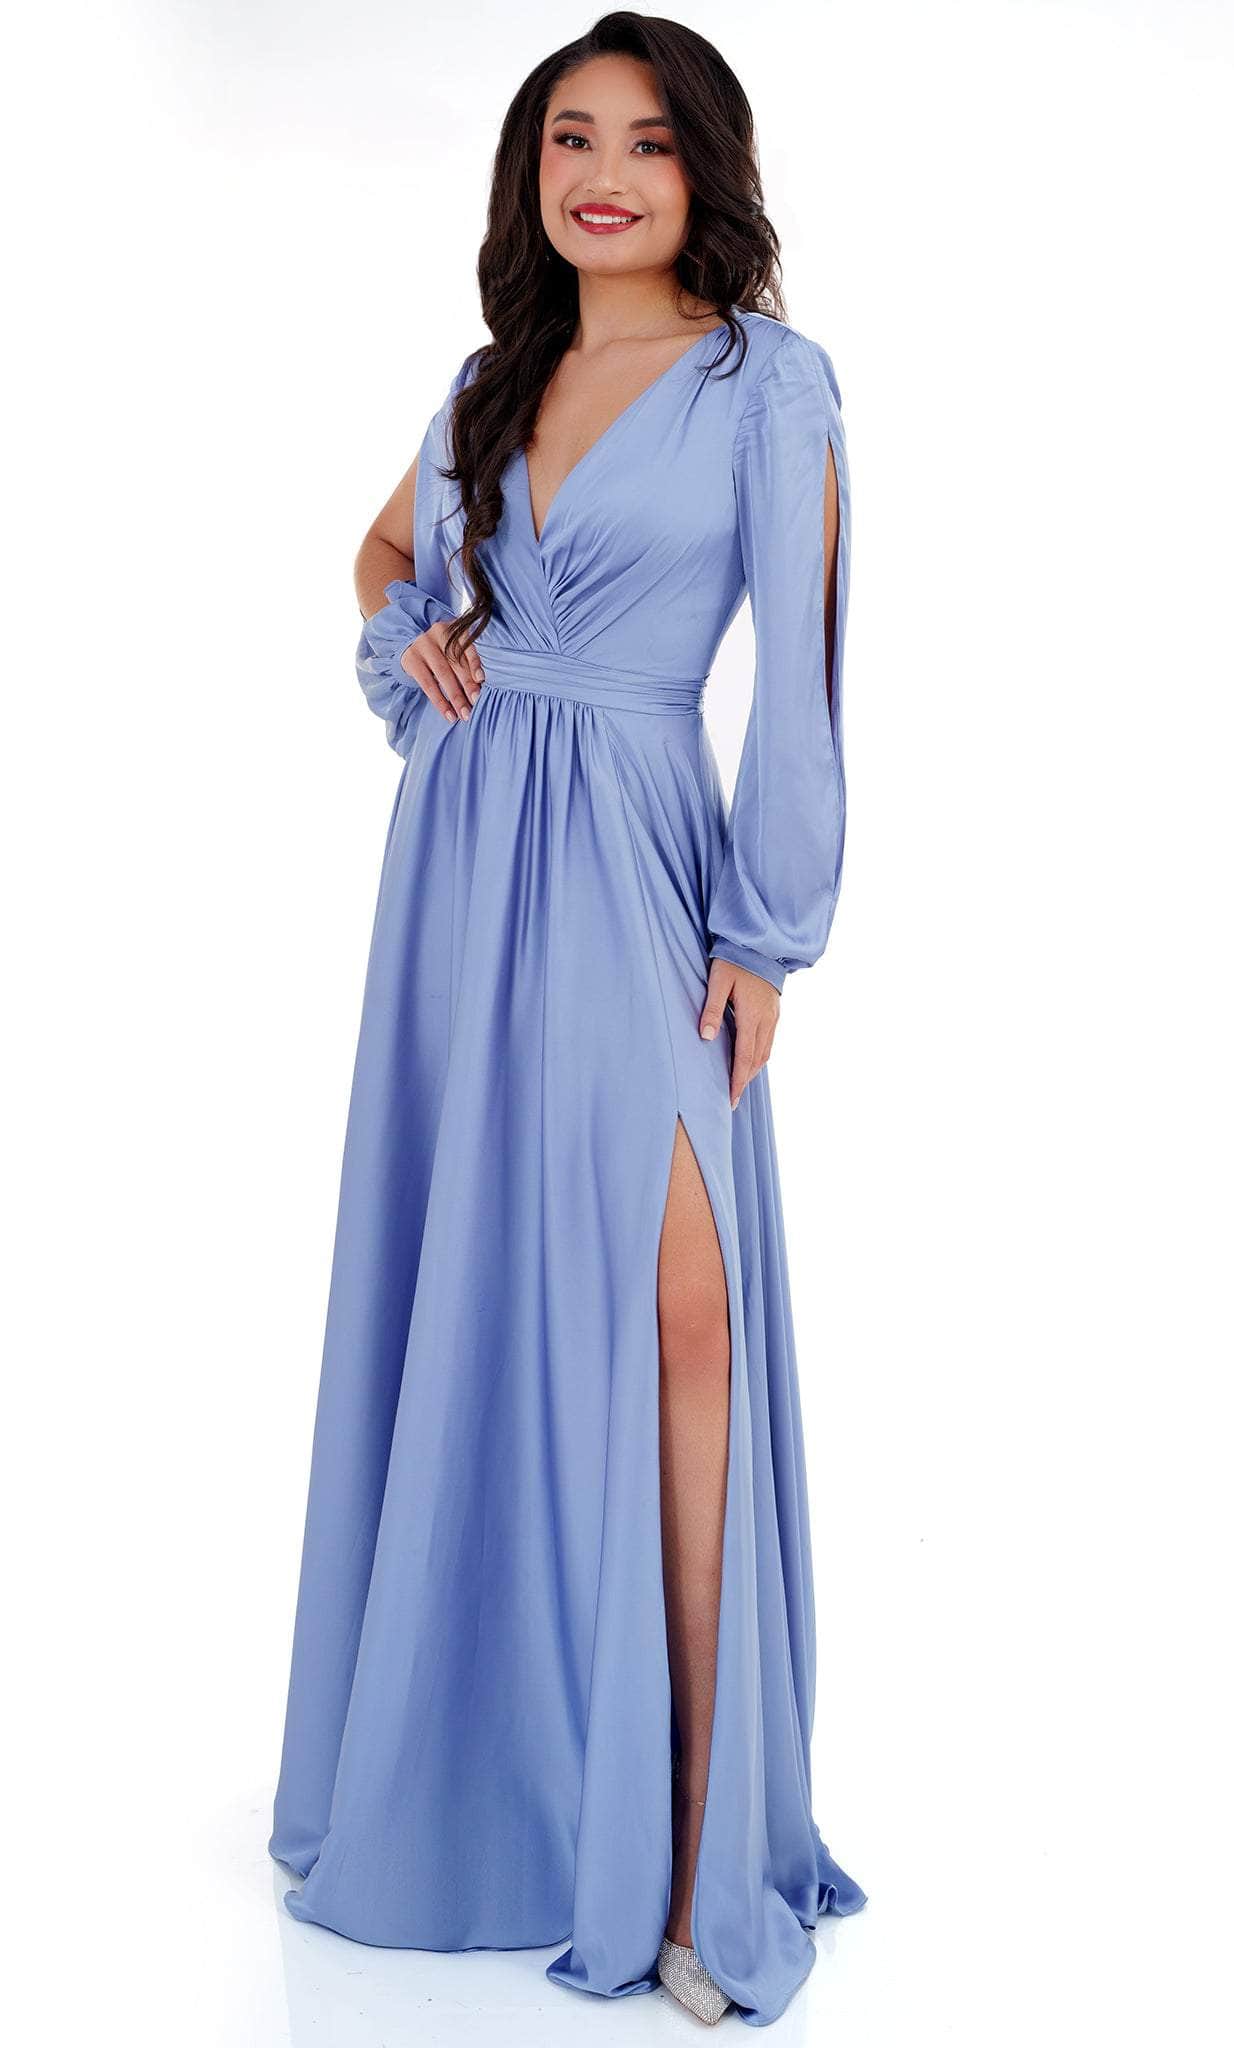 Cecilia Couture 2520 - Long Sleeve Dress